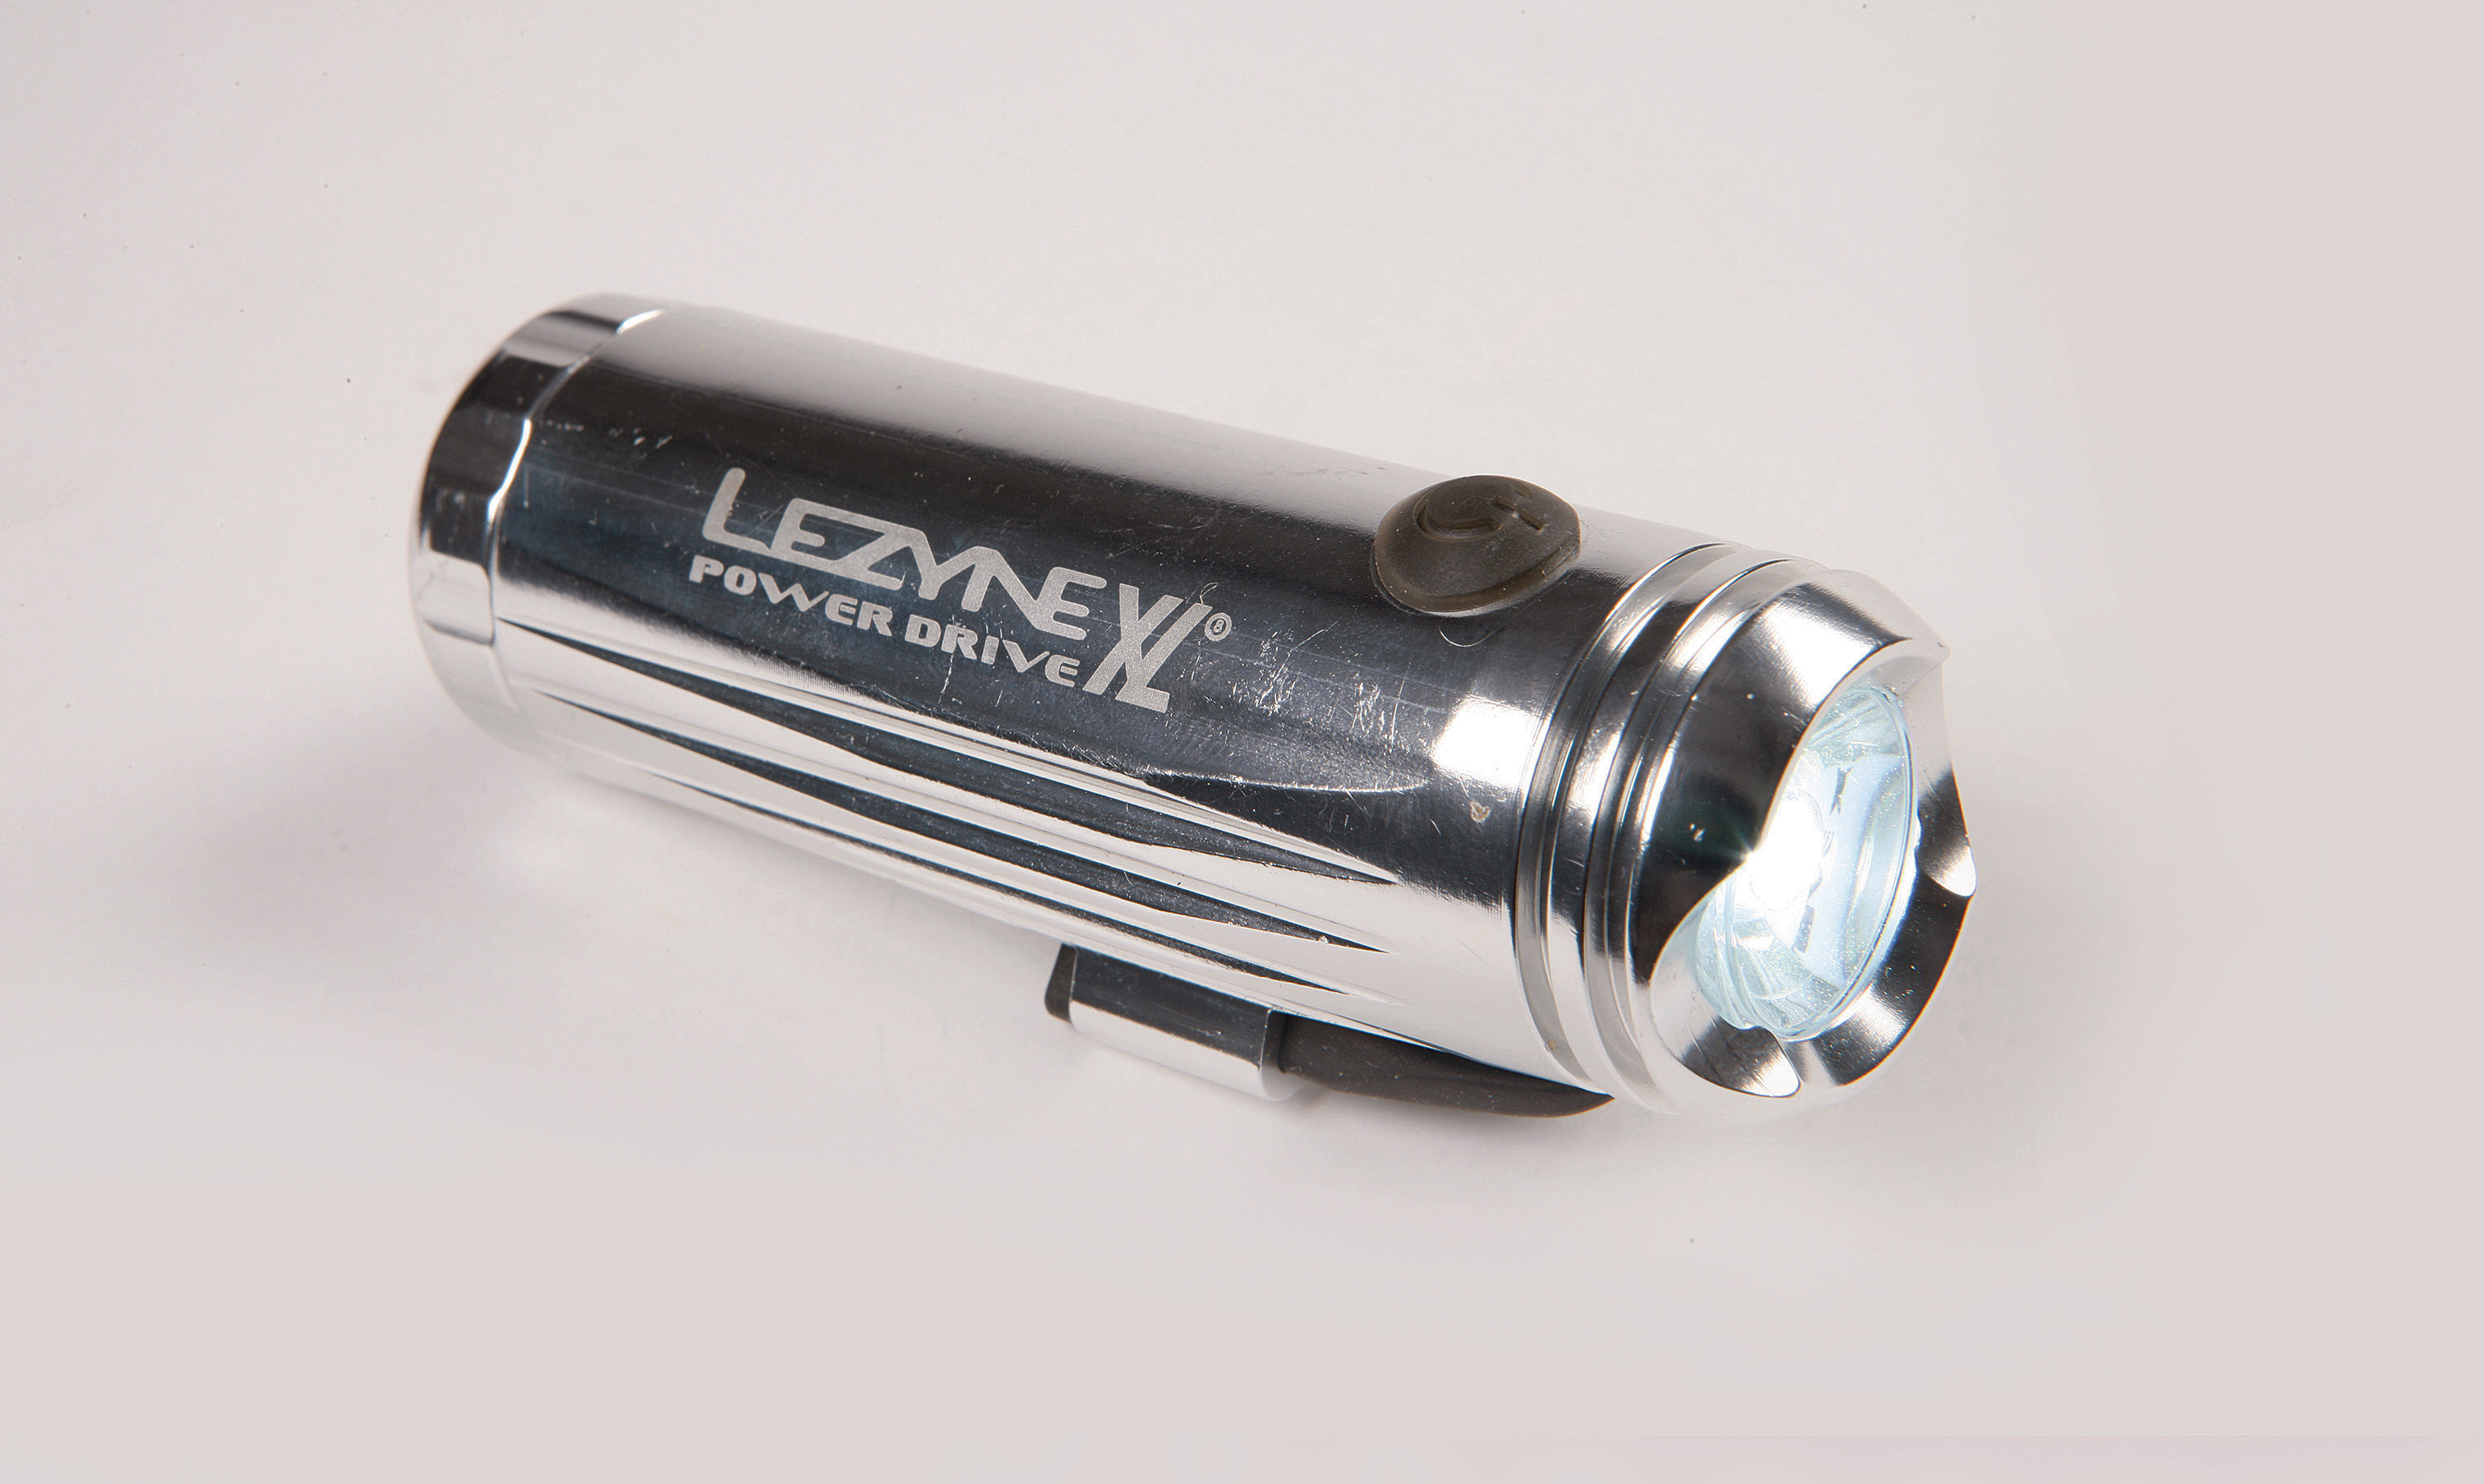 Lezyne Power Drive XL front light review | Cycling Weekly